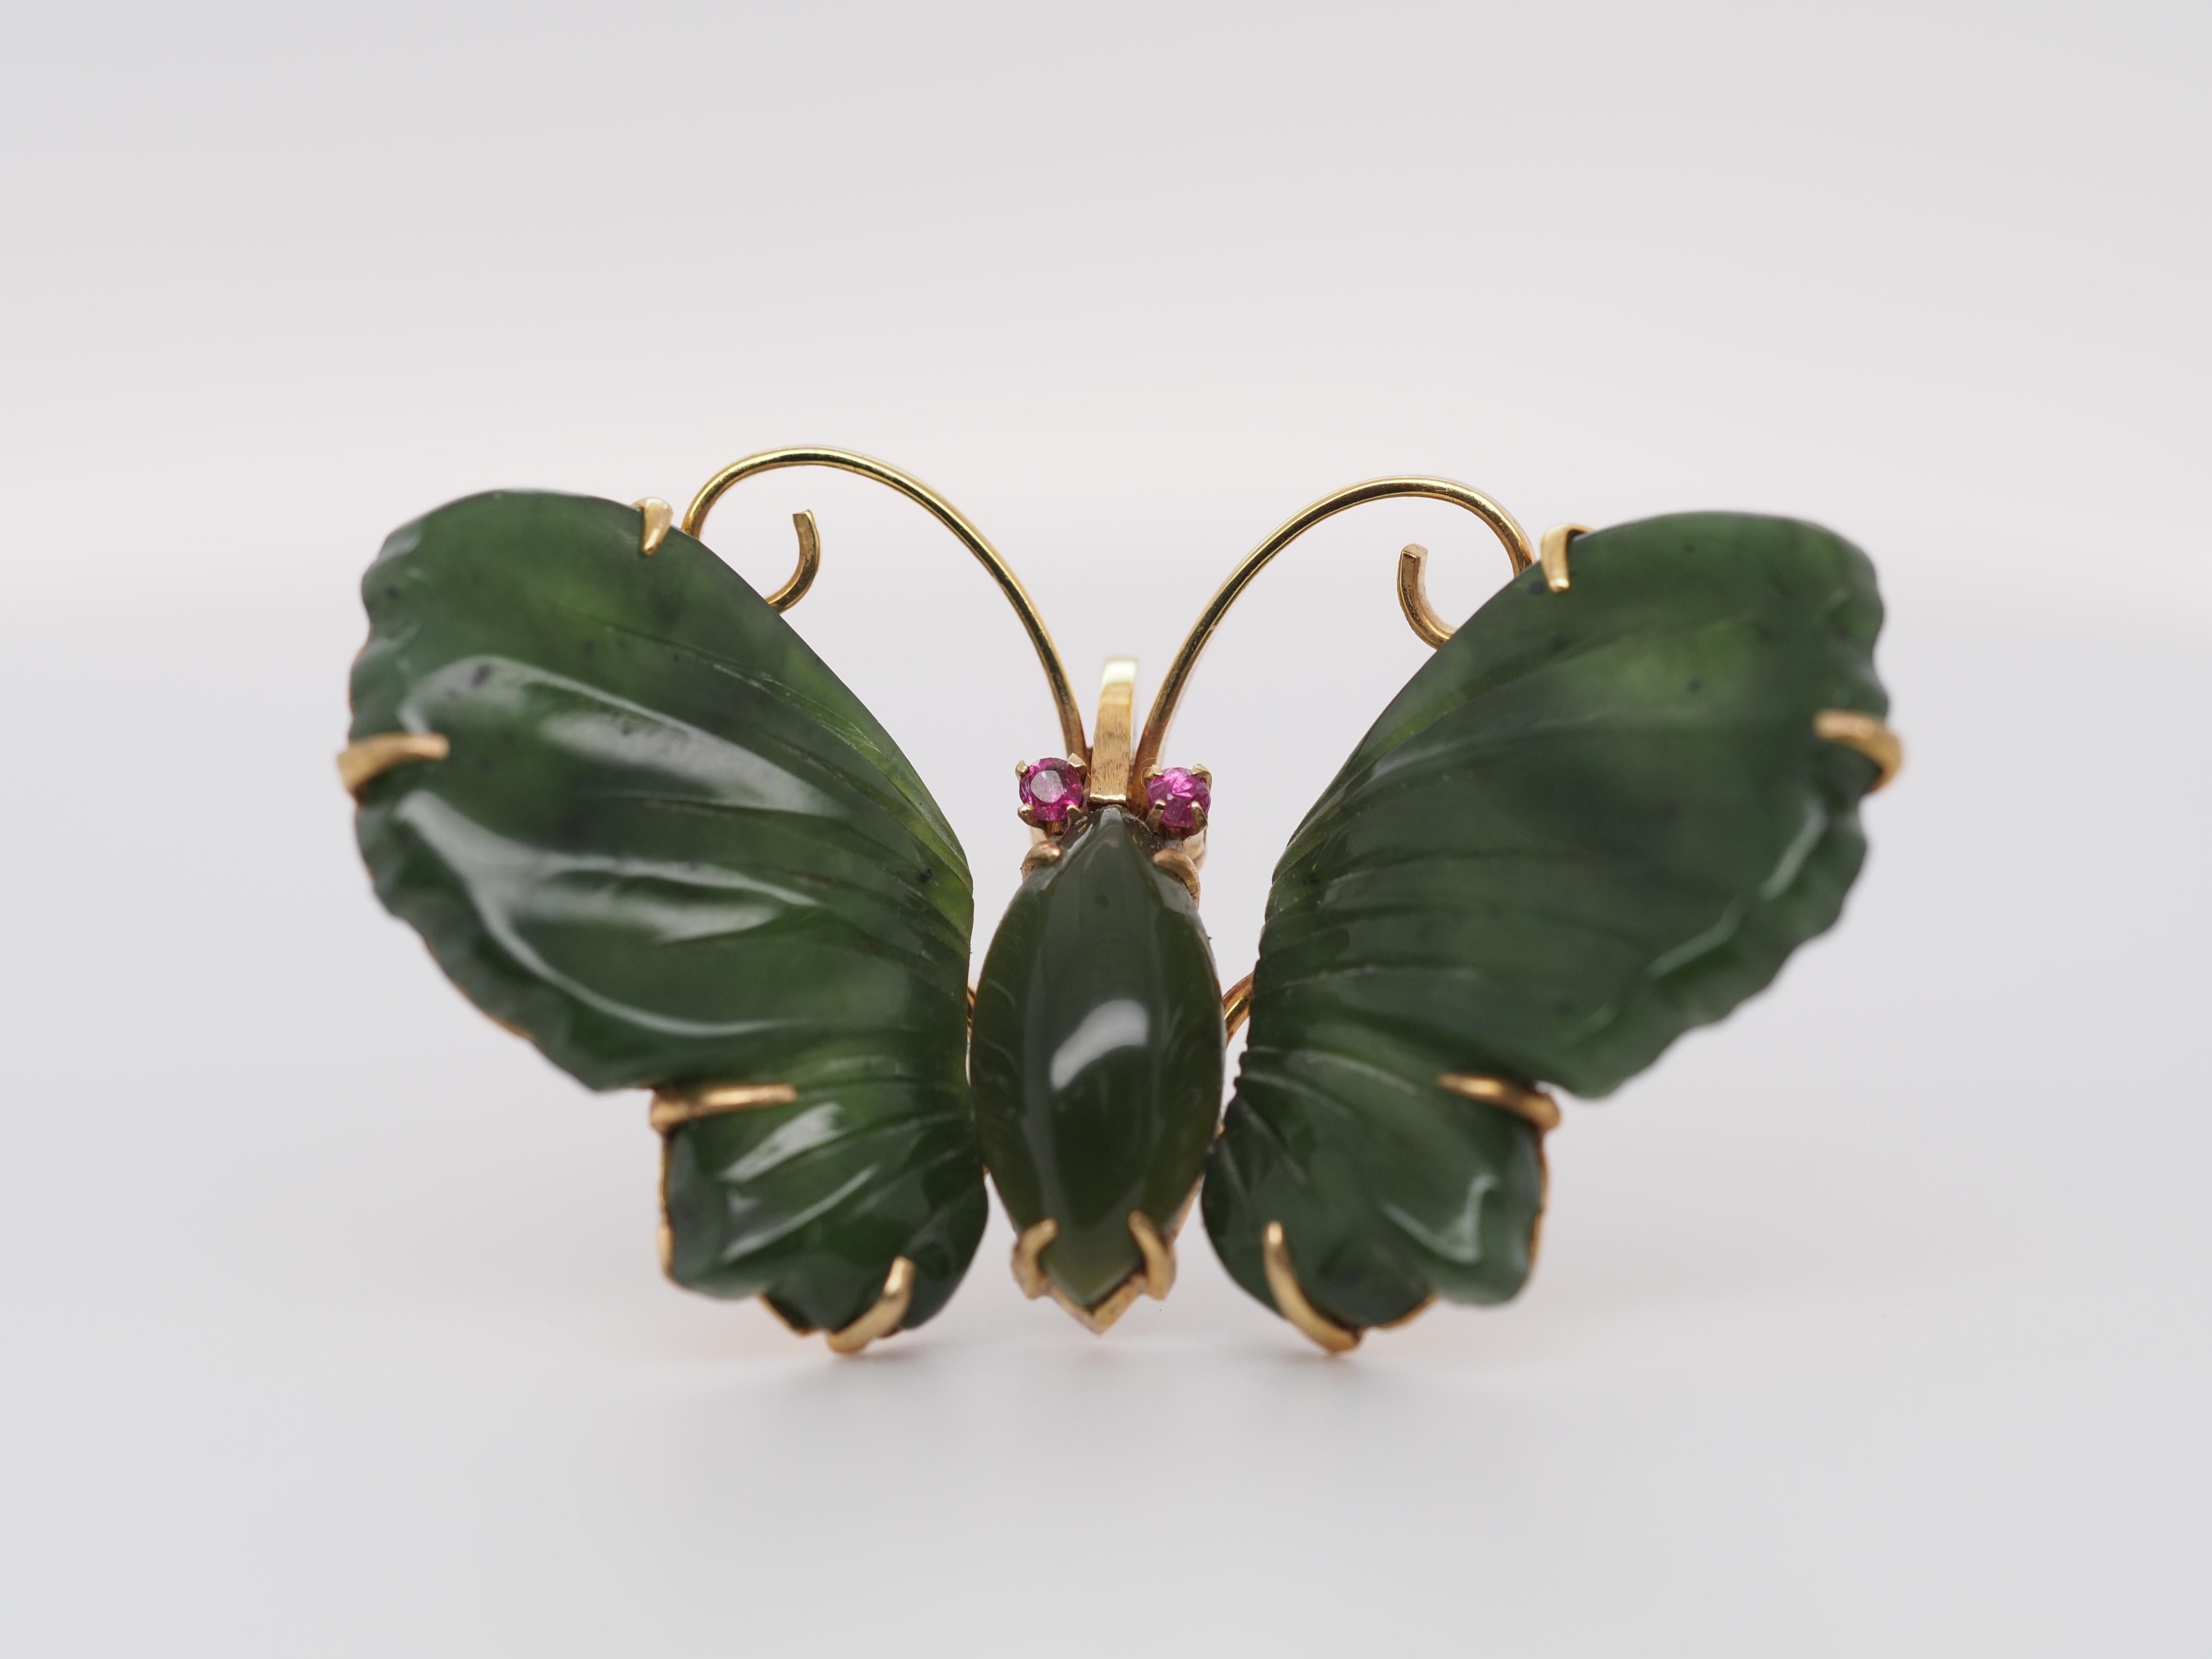 Item Details:
Metal Type: 14K Yellow Gold [Hallmarked, and Tested]
Weight: 10.0 grams
Stone Details:
Cut: Butterfly Wings (2) and Marquise Shape (1)
Color: Green (Dark/Forest)
Ruby Details:
Weight: .08ct, total weight
Cut: Round Transitional